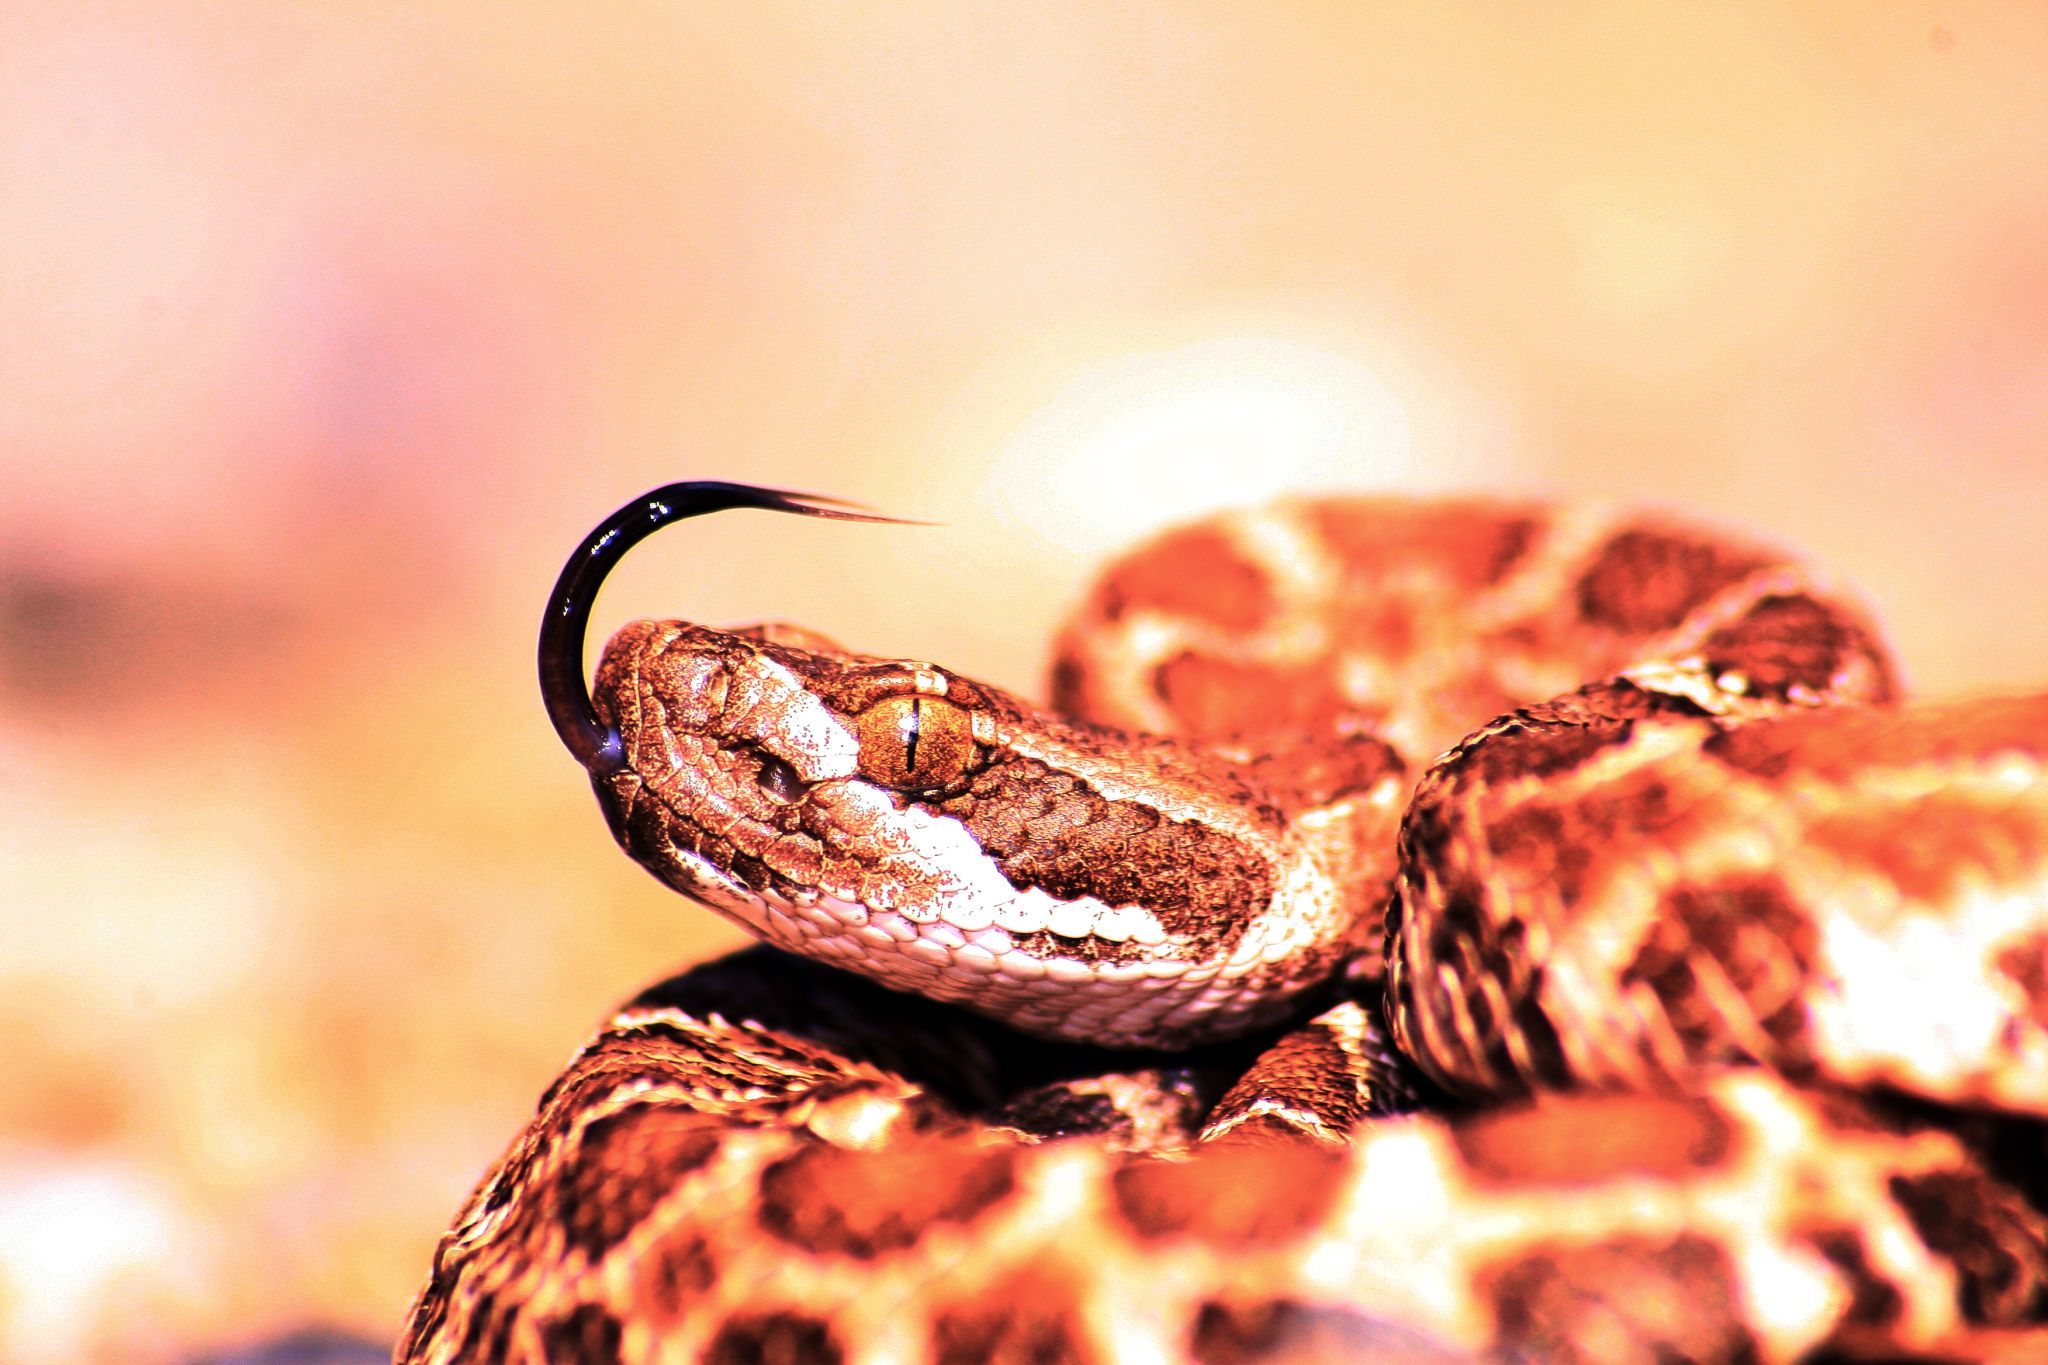 bay snake snakes california area venomous northern rattlesnakes season east rattlesnake south means around pacific slithering arrived which rattlers expected